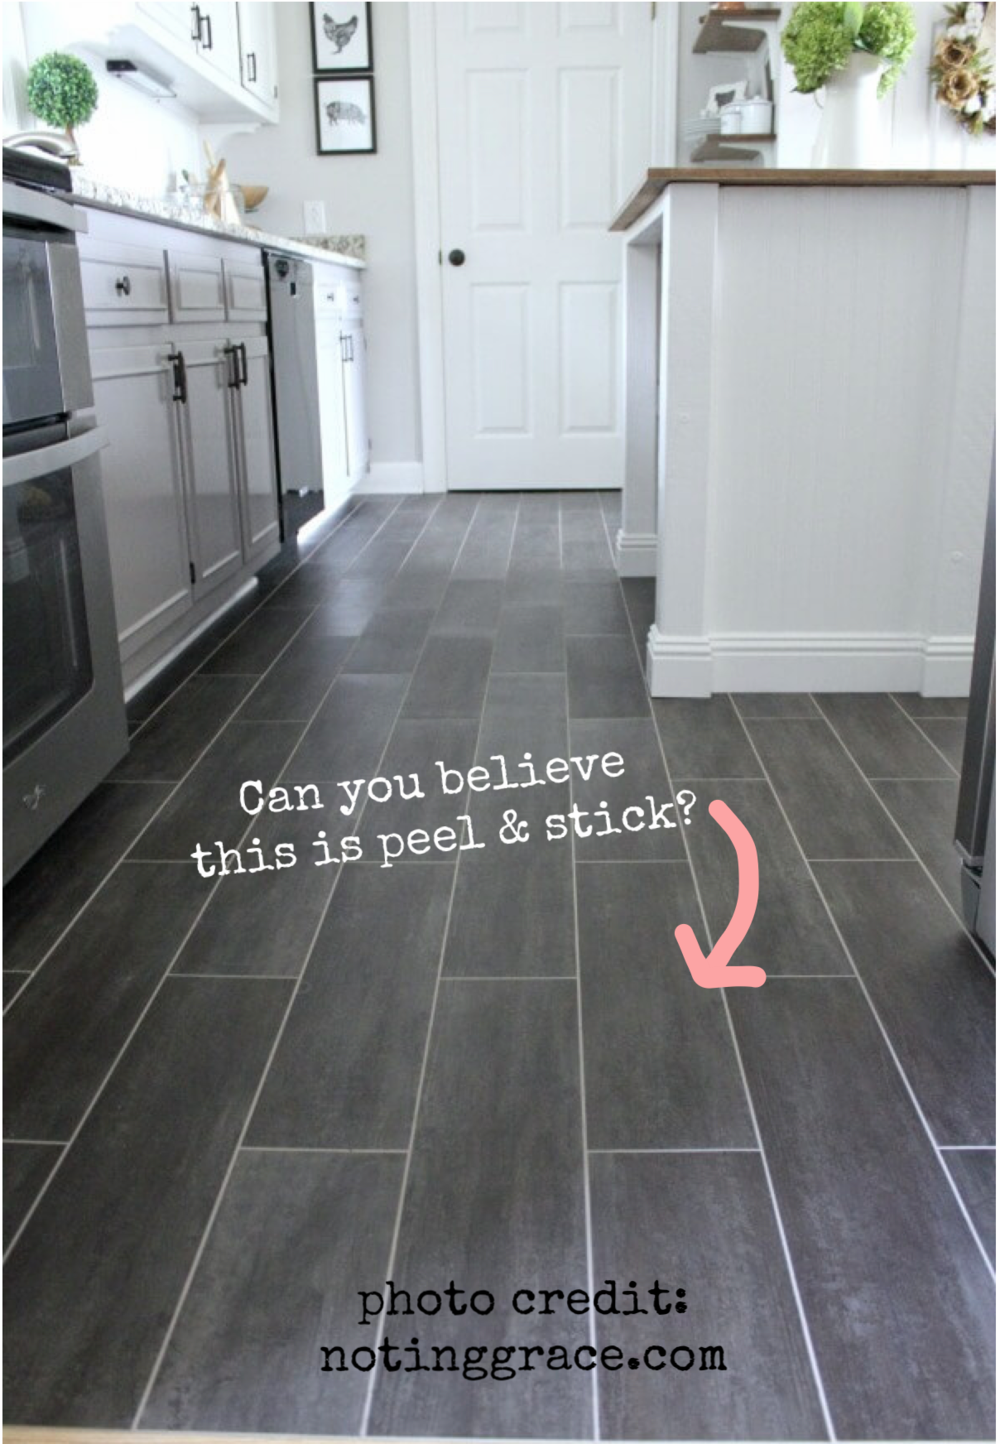 Ideas For Covering Up Tile Floors, What Kind Of Flooring Can Be Laid Over Ceramic Tile